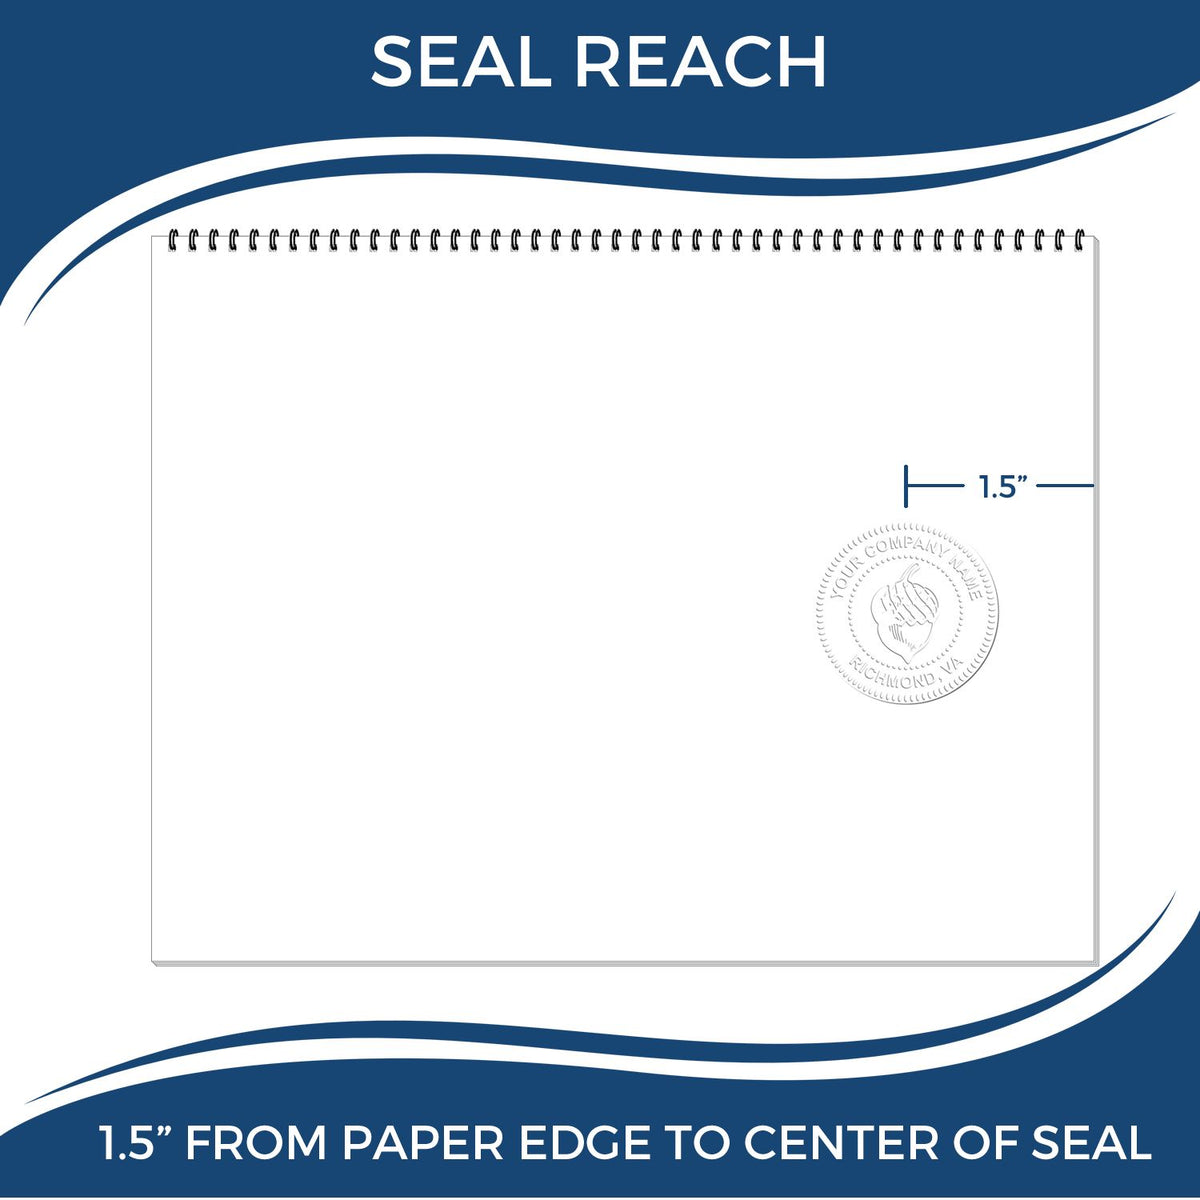 An infographic showing the seal reach which is represented by a ruler and a miniature seal image of the Soft New Jersey Professional Geologist Seal